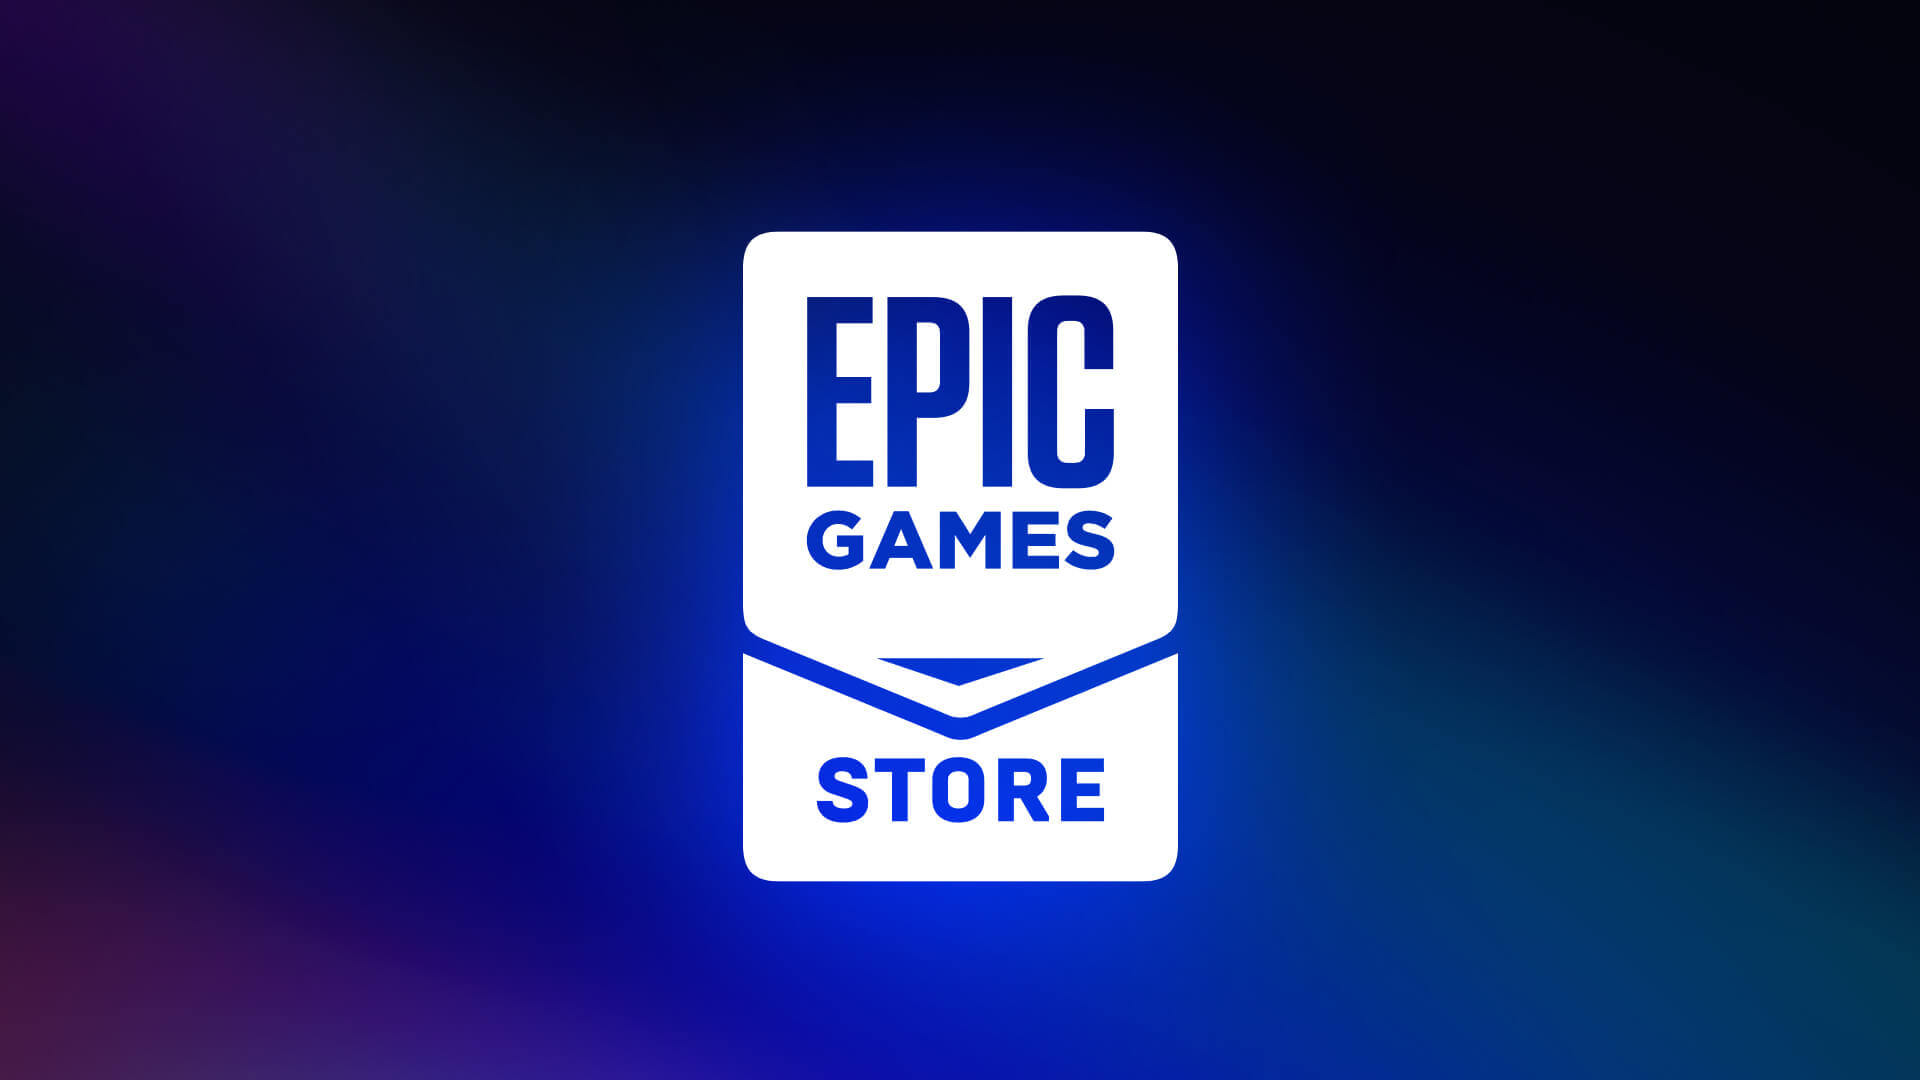 epic-games-store-ratings-and-polls-update-1920x1080-dc391bf9ab36